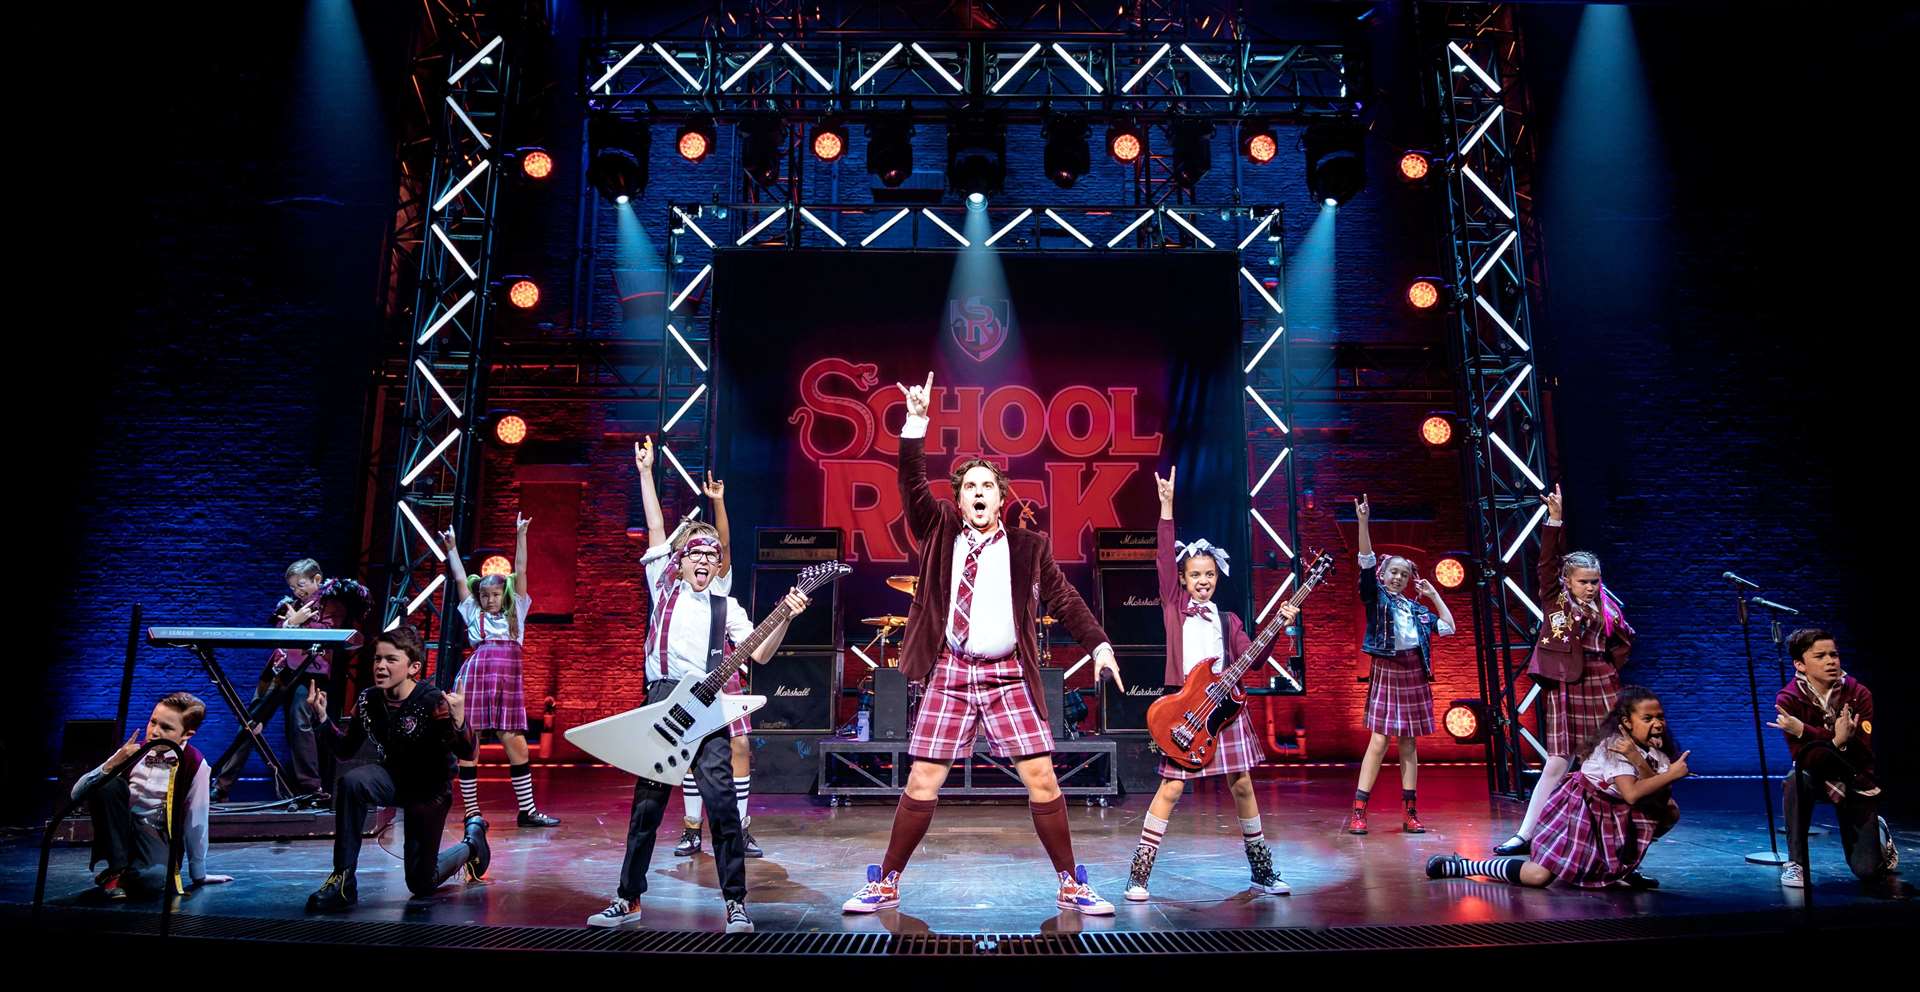 Don't miss out on the chance to snap up some discounted tickets to catch School of Rock The Musical at the West End's Gillian Lynne Theatre.